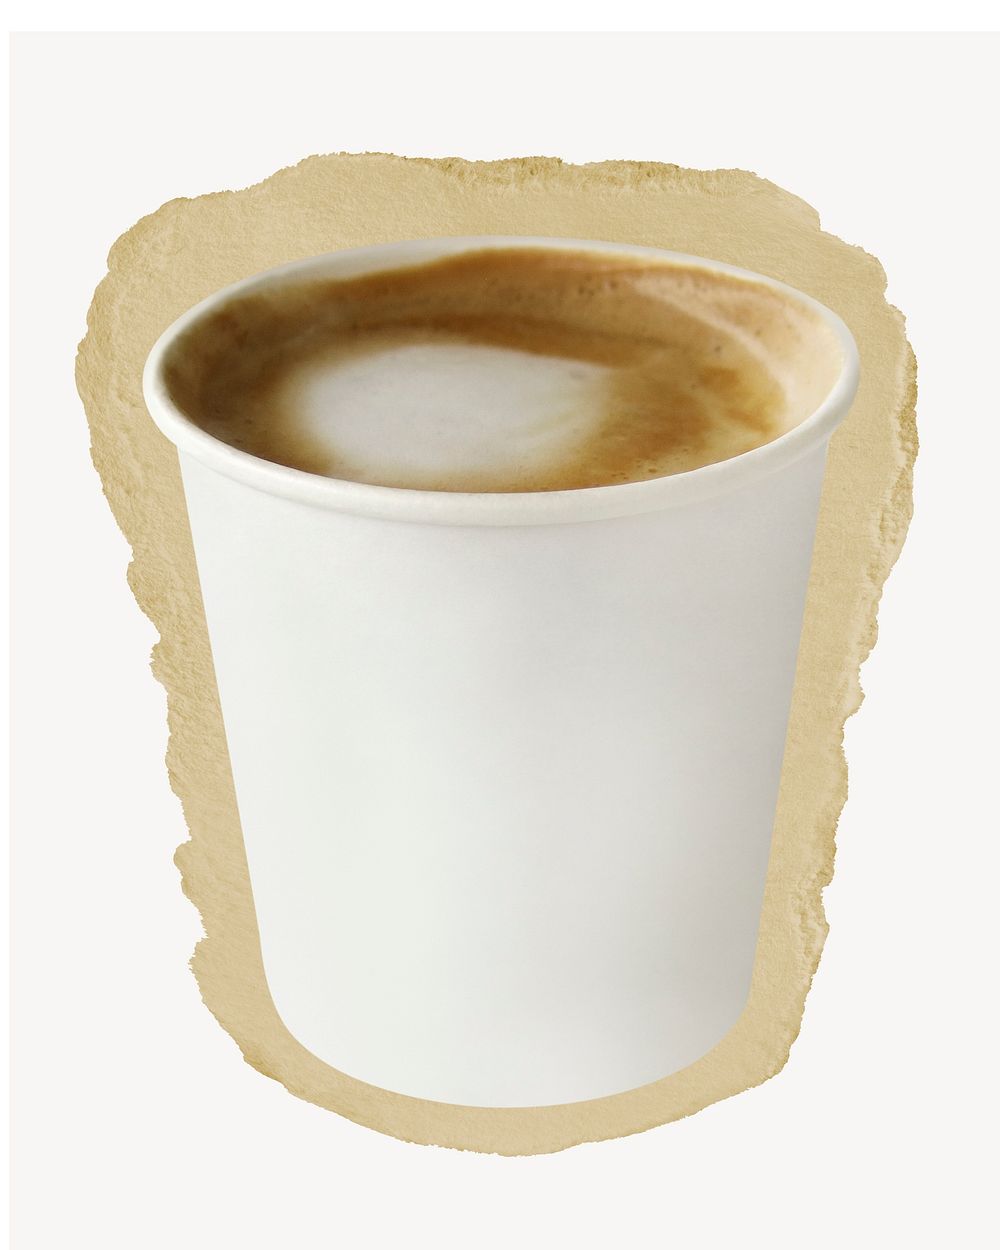 Latte cup, food and beverage, ripped paper design